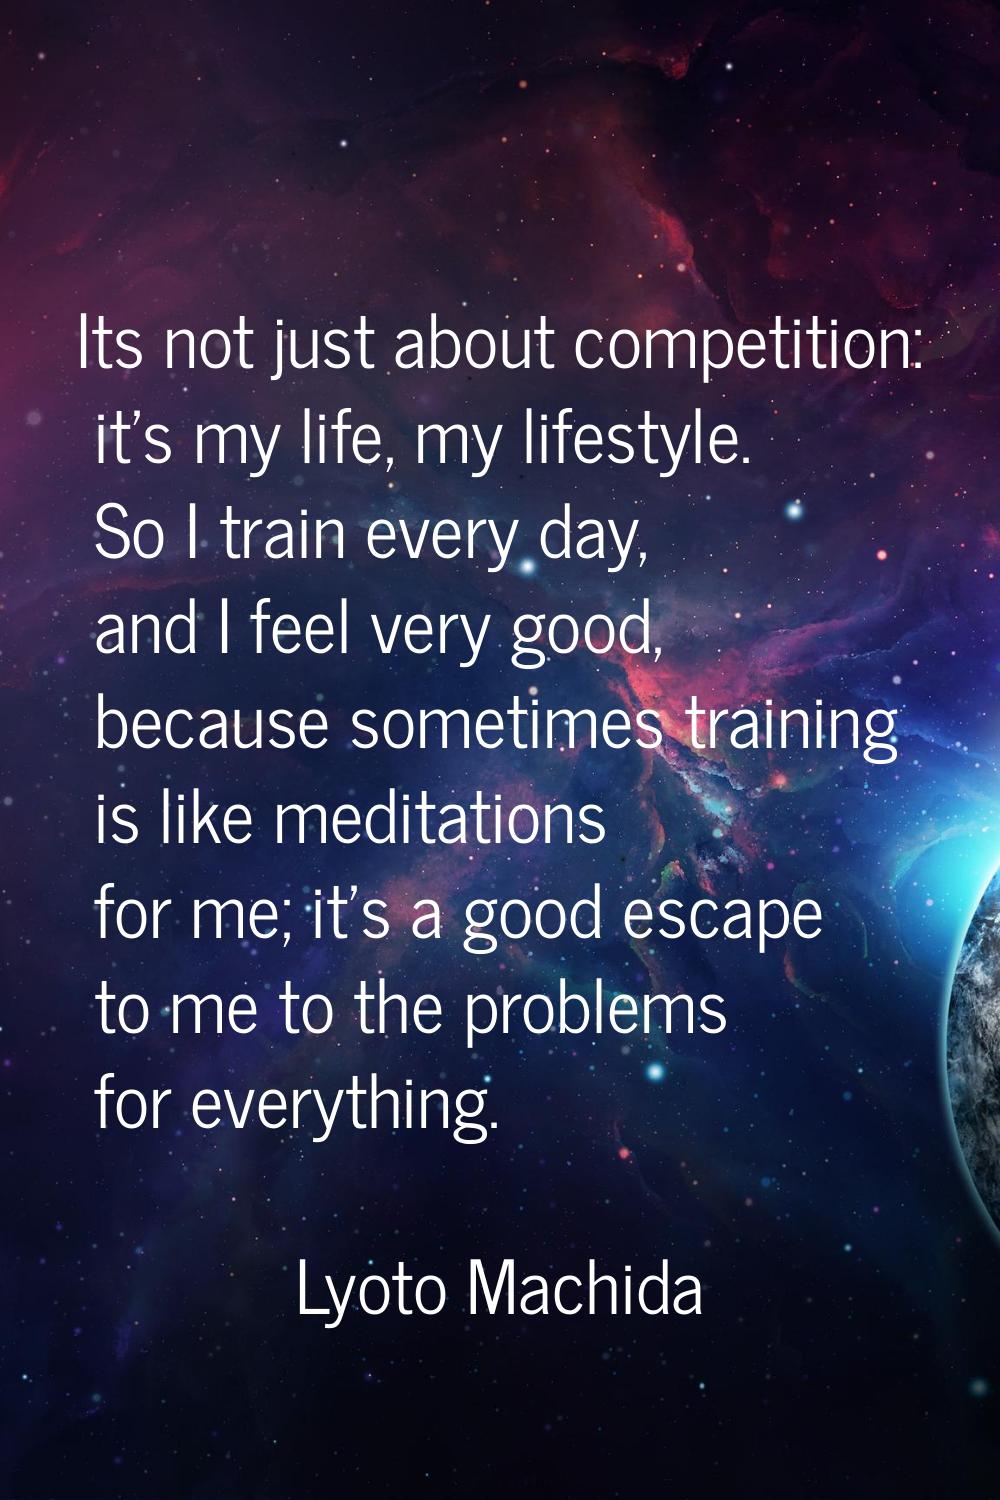 Its not just about competition: it's my life, my lifestyle. So I train every day, and I feel very g